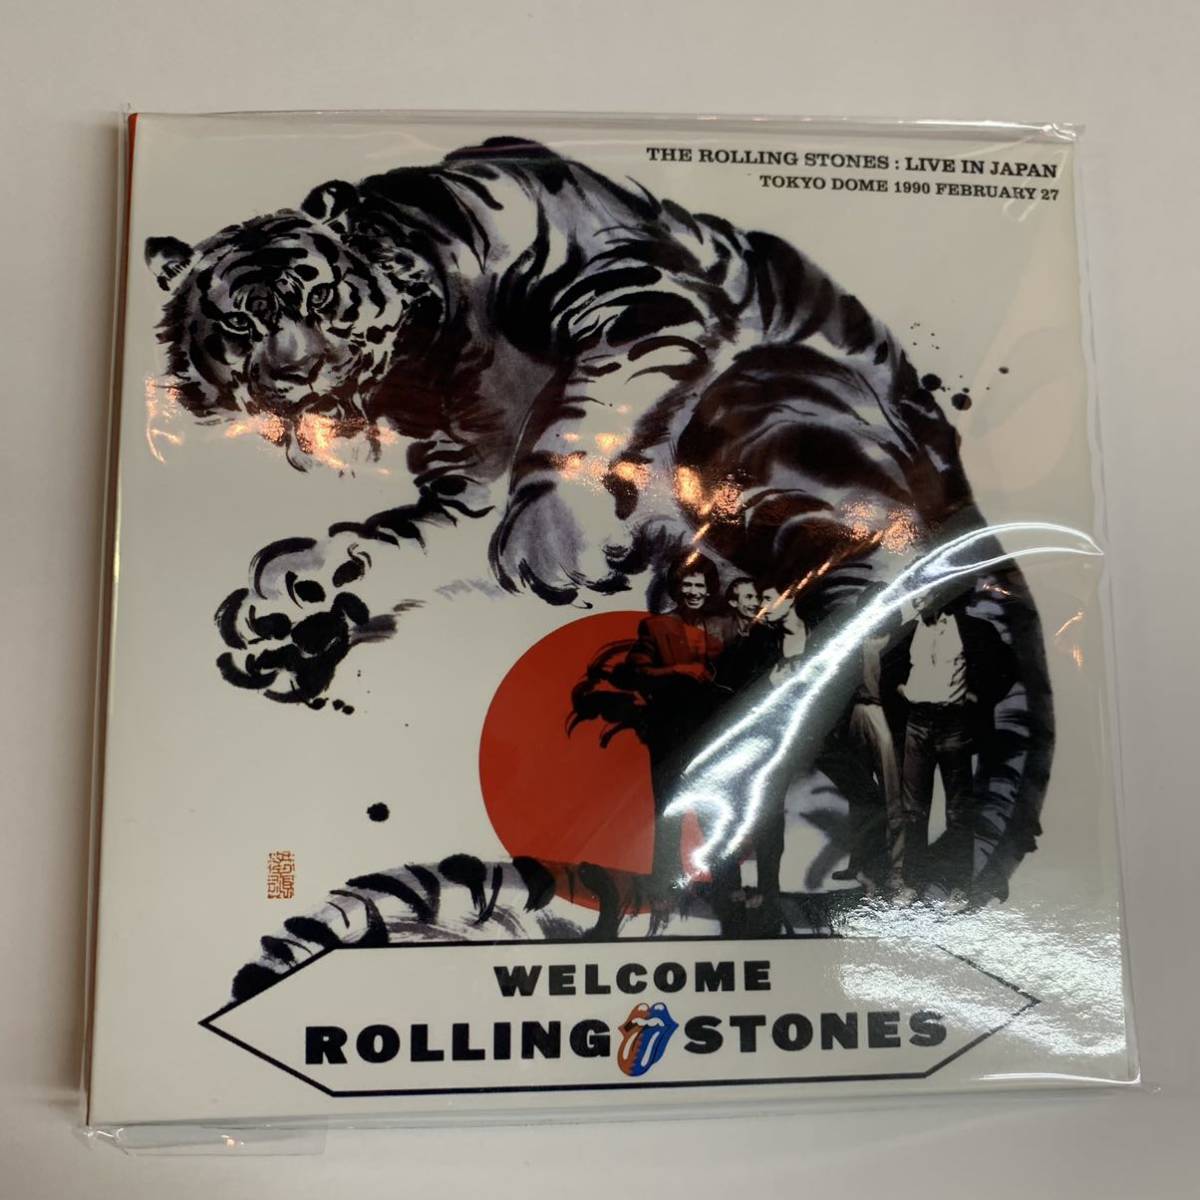 THE ROLLING STONES / LIVE IN JAPAN TOKYO DOME 1990 FEBRUARY 27 (2CD) EMPRESS VALLEY 廃盤_画像1